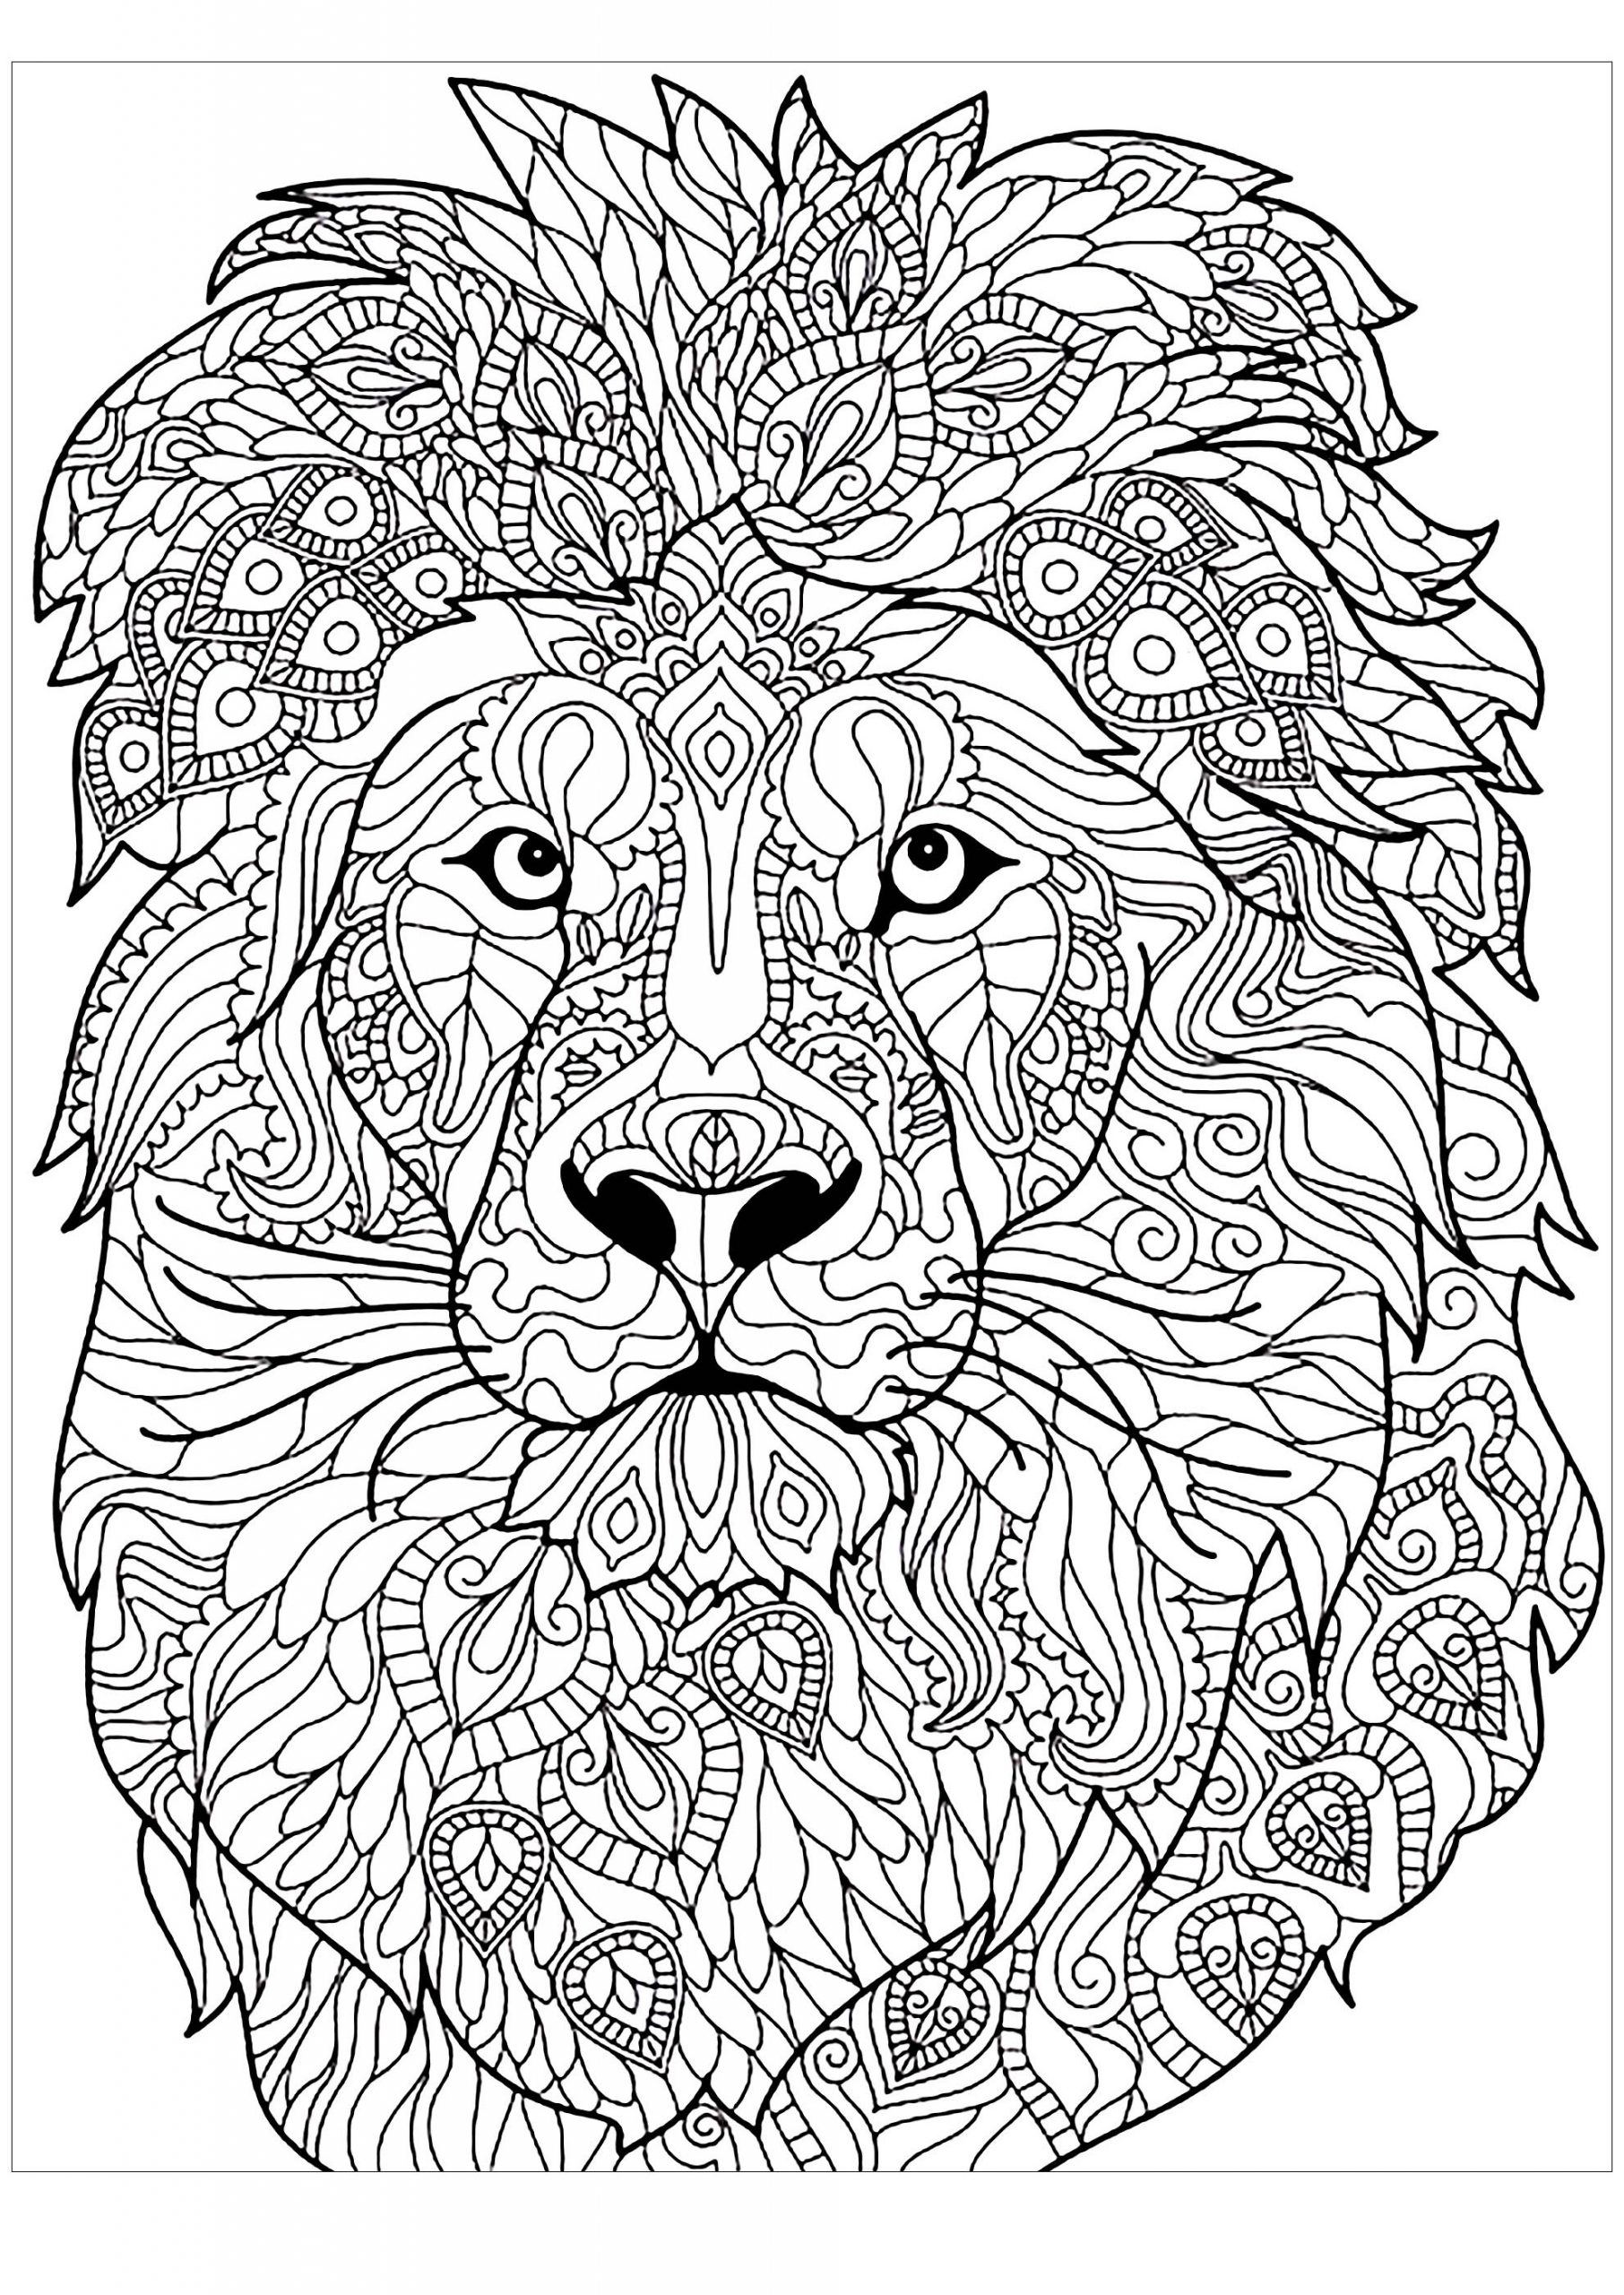 Hard and Difficult Pattern Mandala Lion Coloring Pages